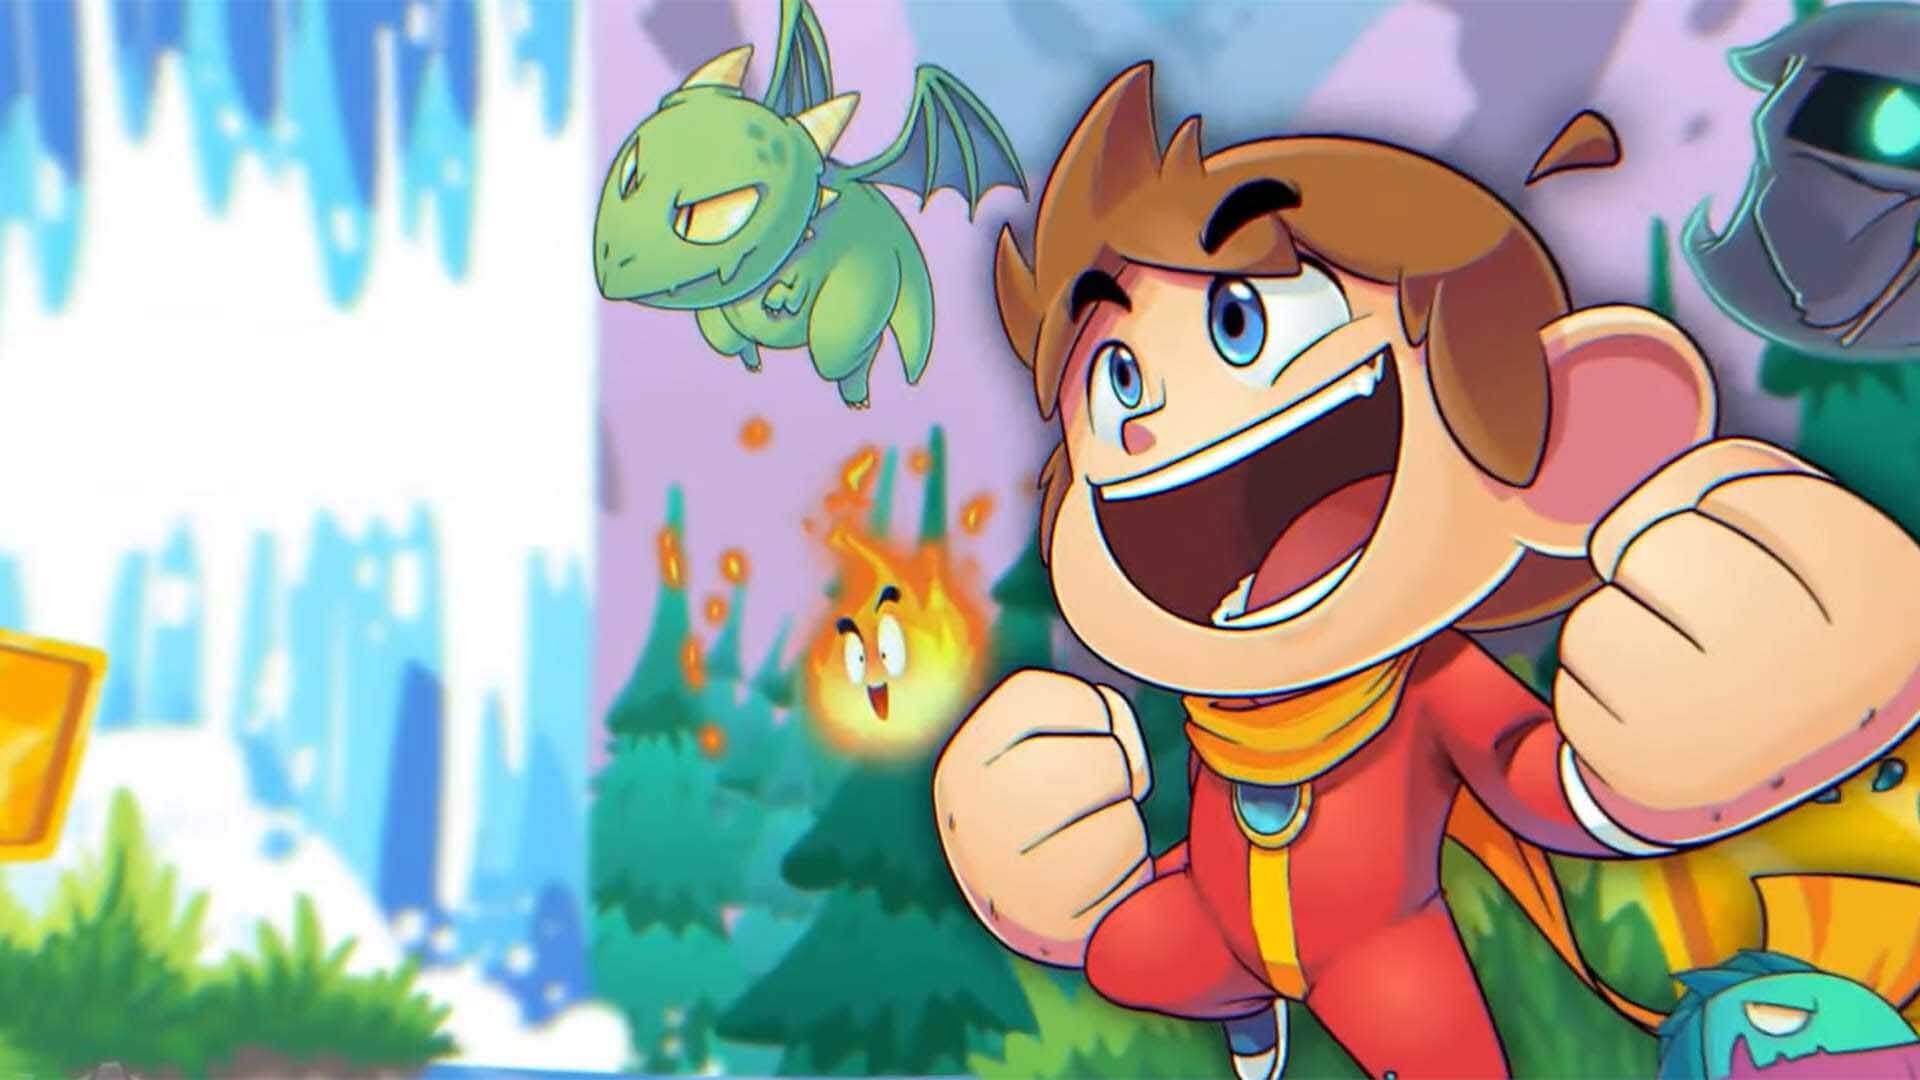 Alex Kidd in Miracle World DX is coming to PC on June 24th